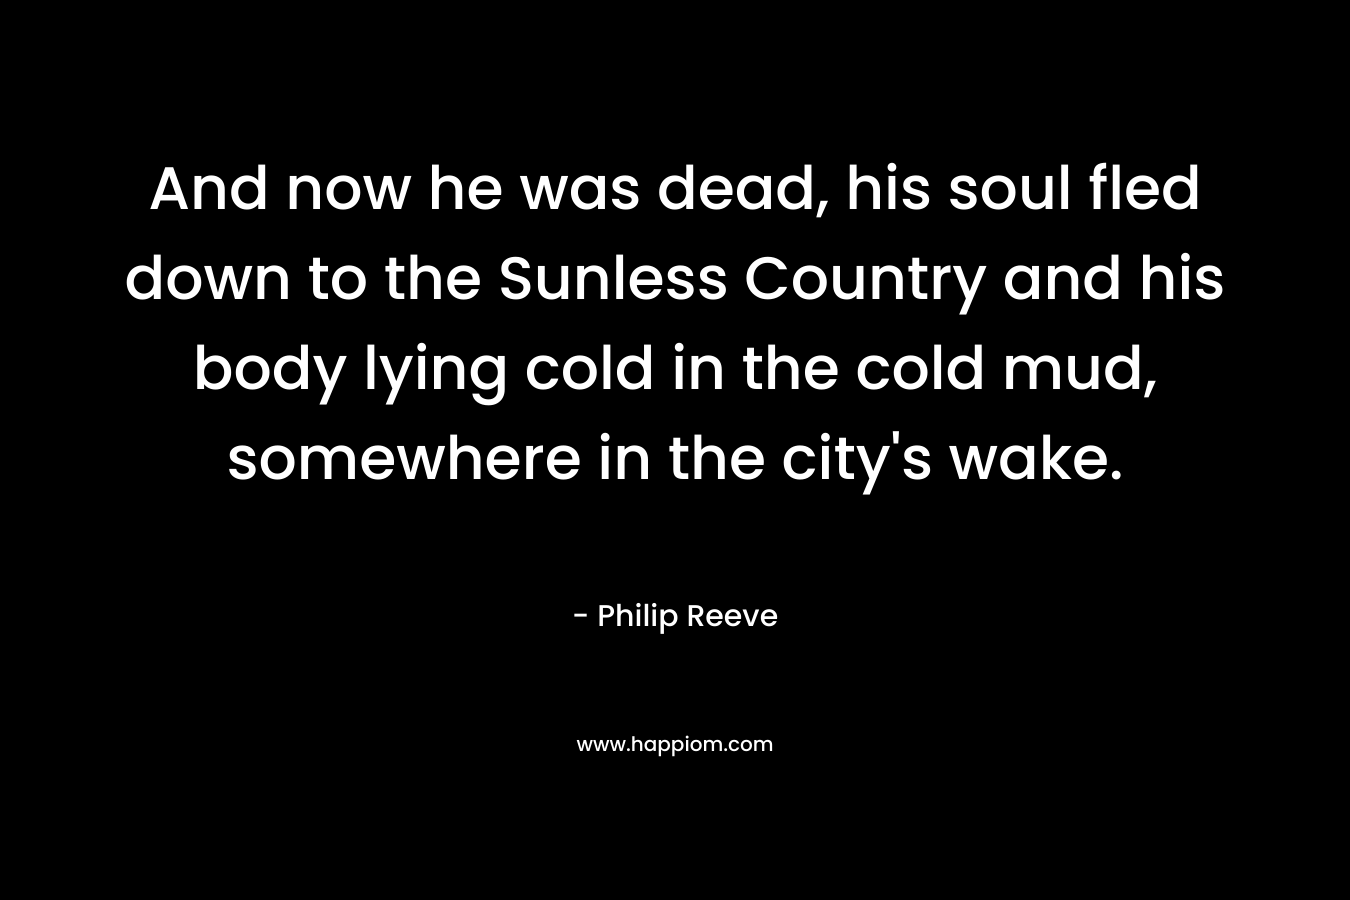 And now he was dead, his soul fled down to the Sunless Country and his body lying cold in the cold mud, somewhere in the city's wake.